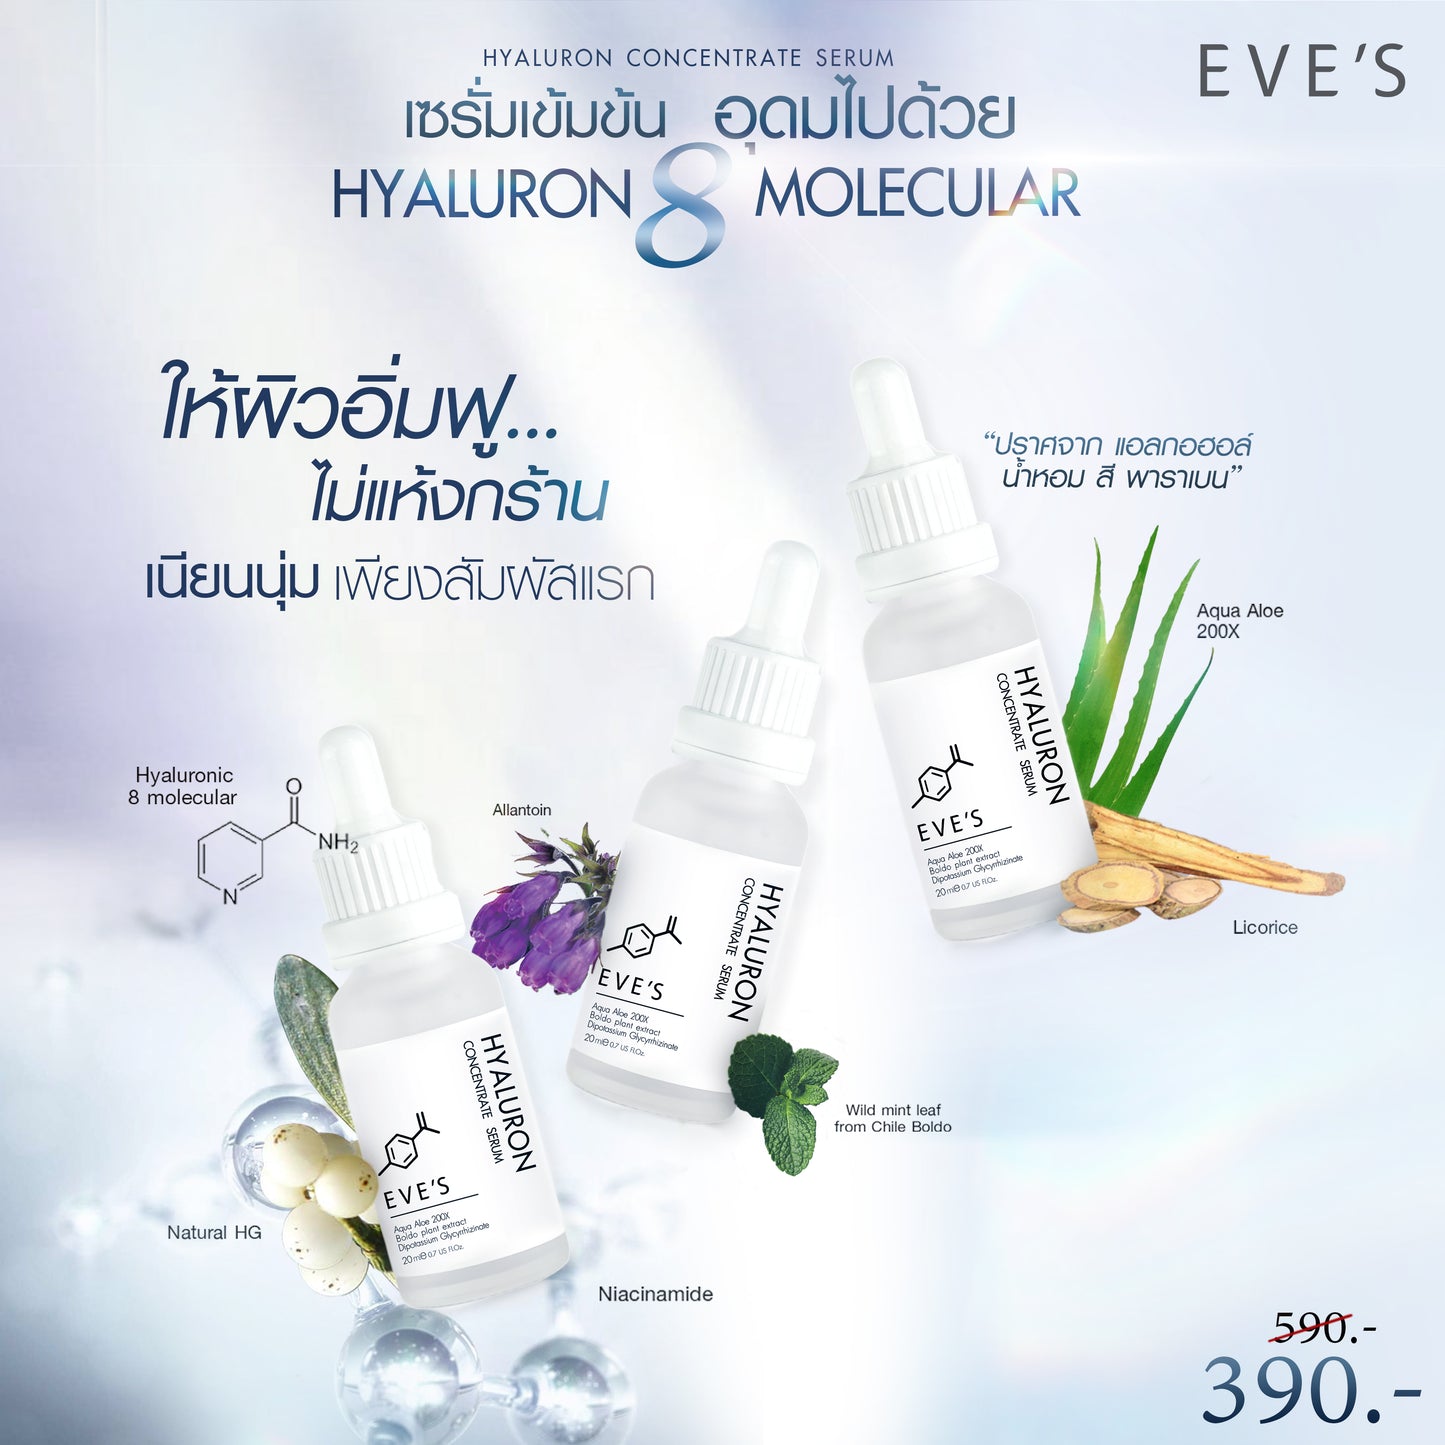 EVE'S HYALURON CONCENTRATE SERUM 20 ml.